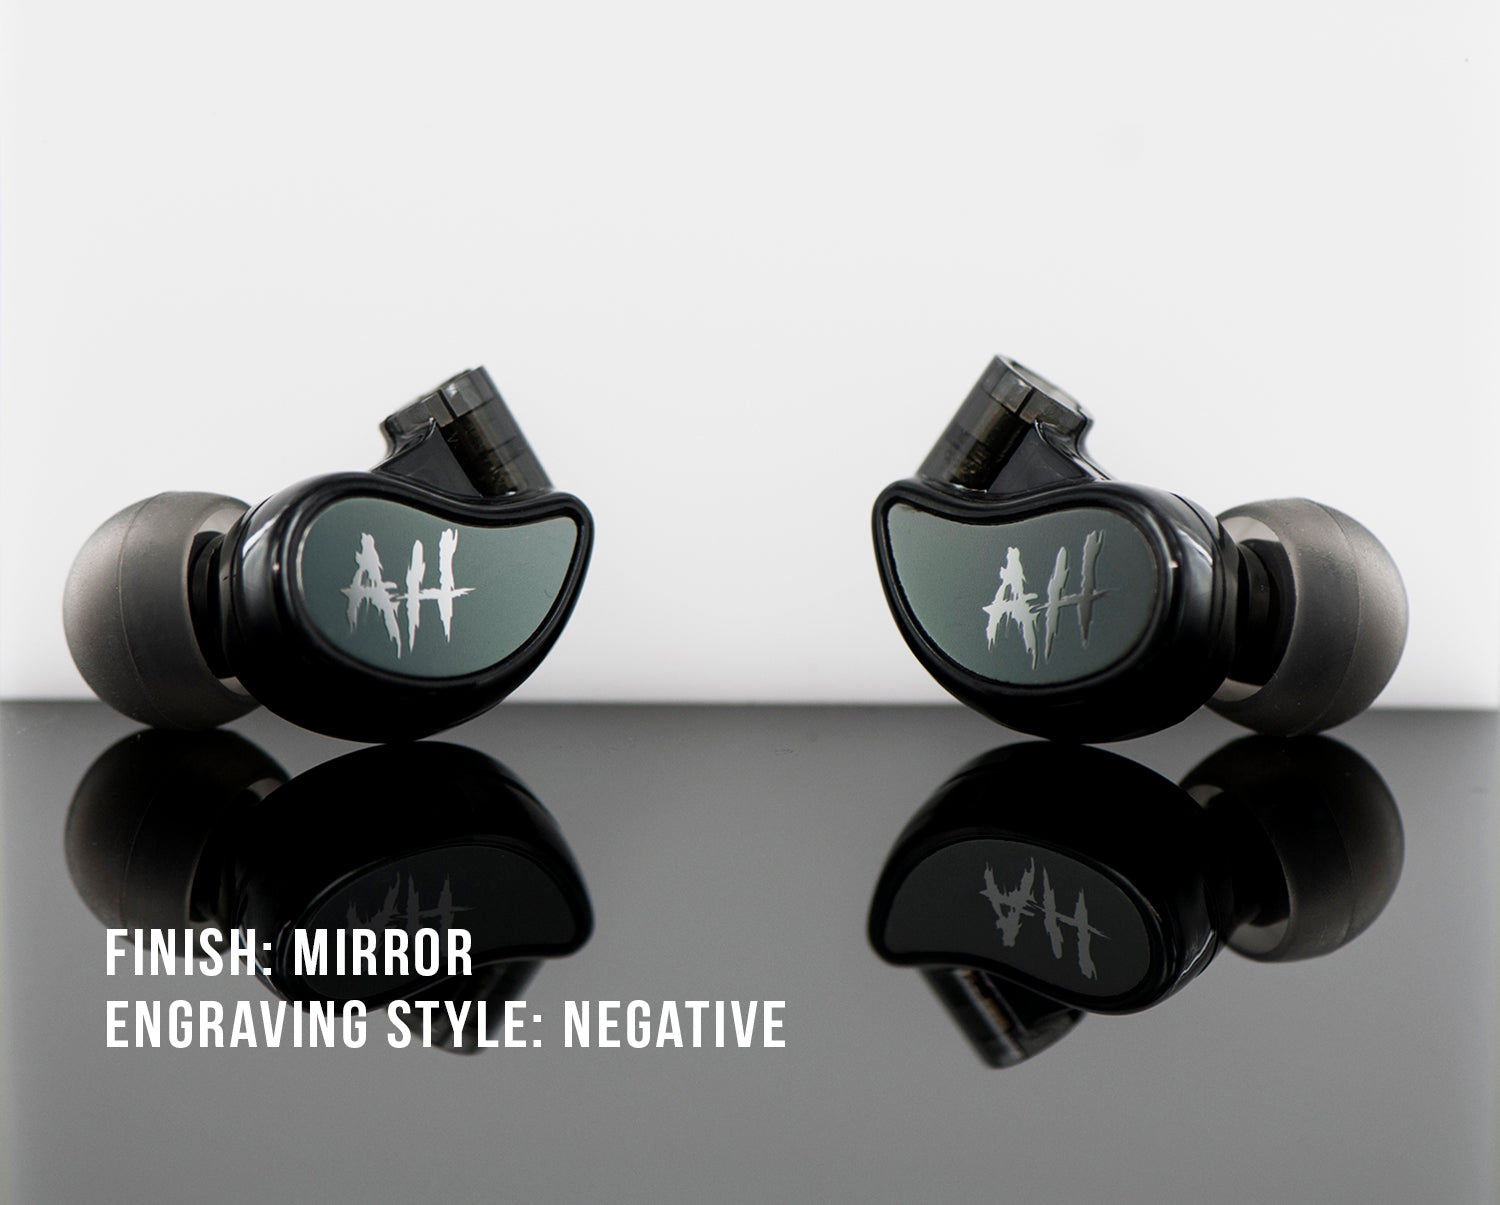 Two black in-ear headphones with a mirrored finish and a negative-style heart rate engraving, displayed on a reflective surface with the text "finish: mirror engraving style: negative.